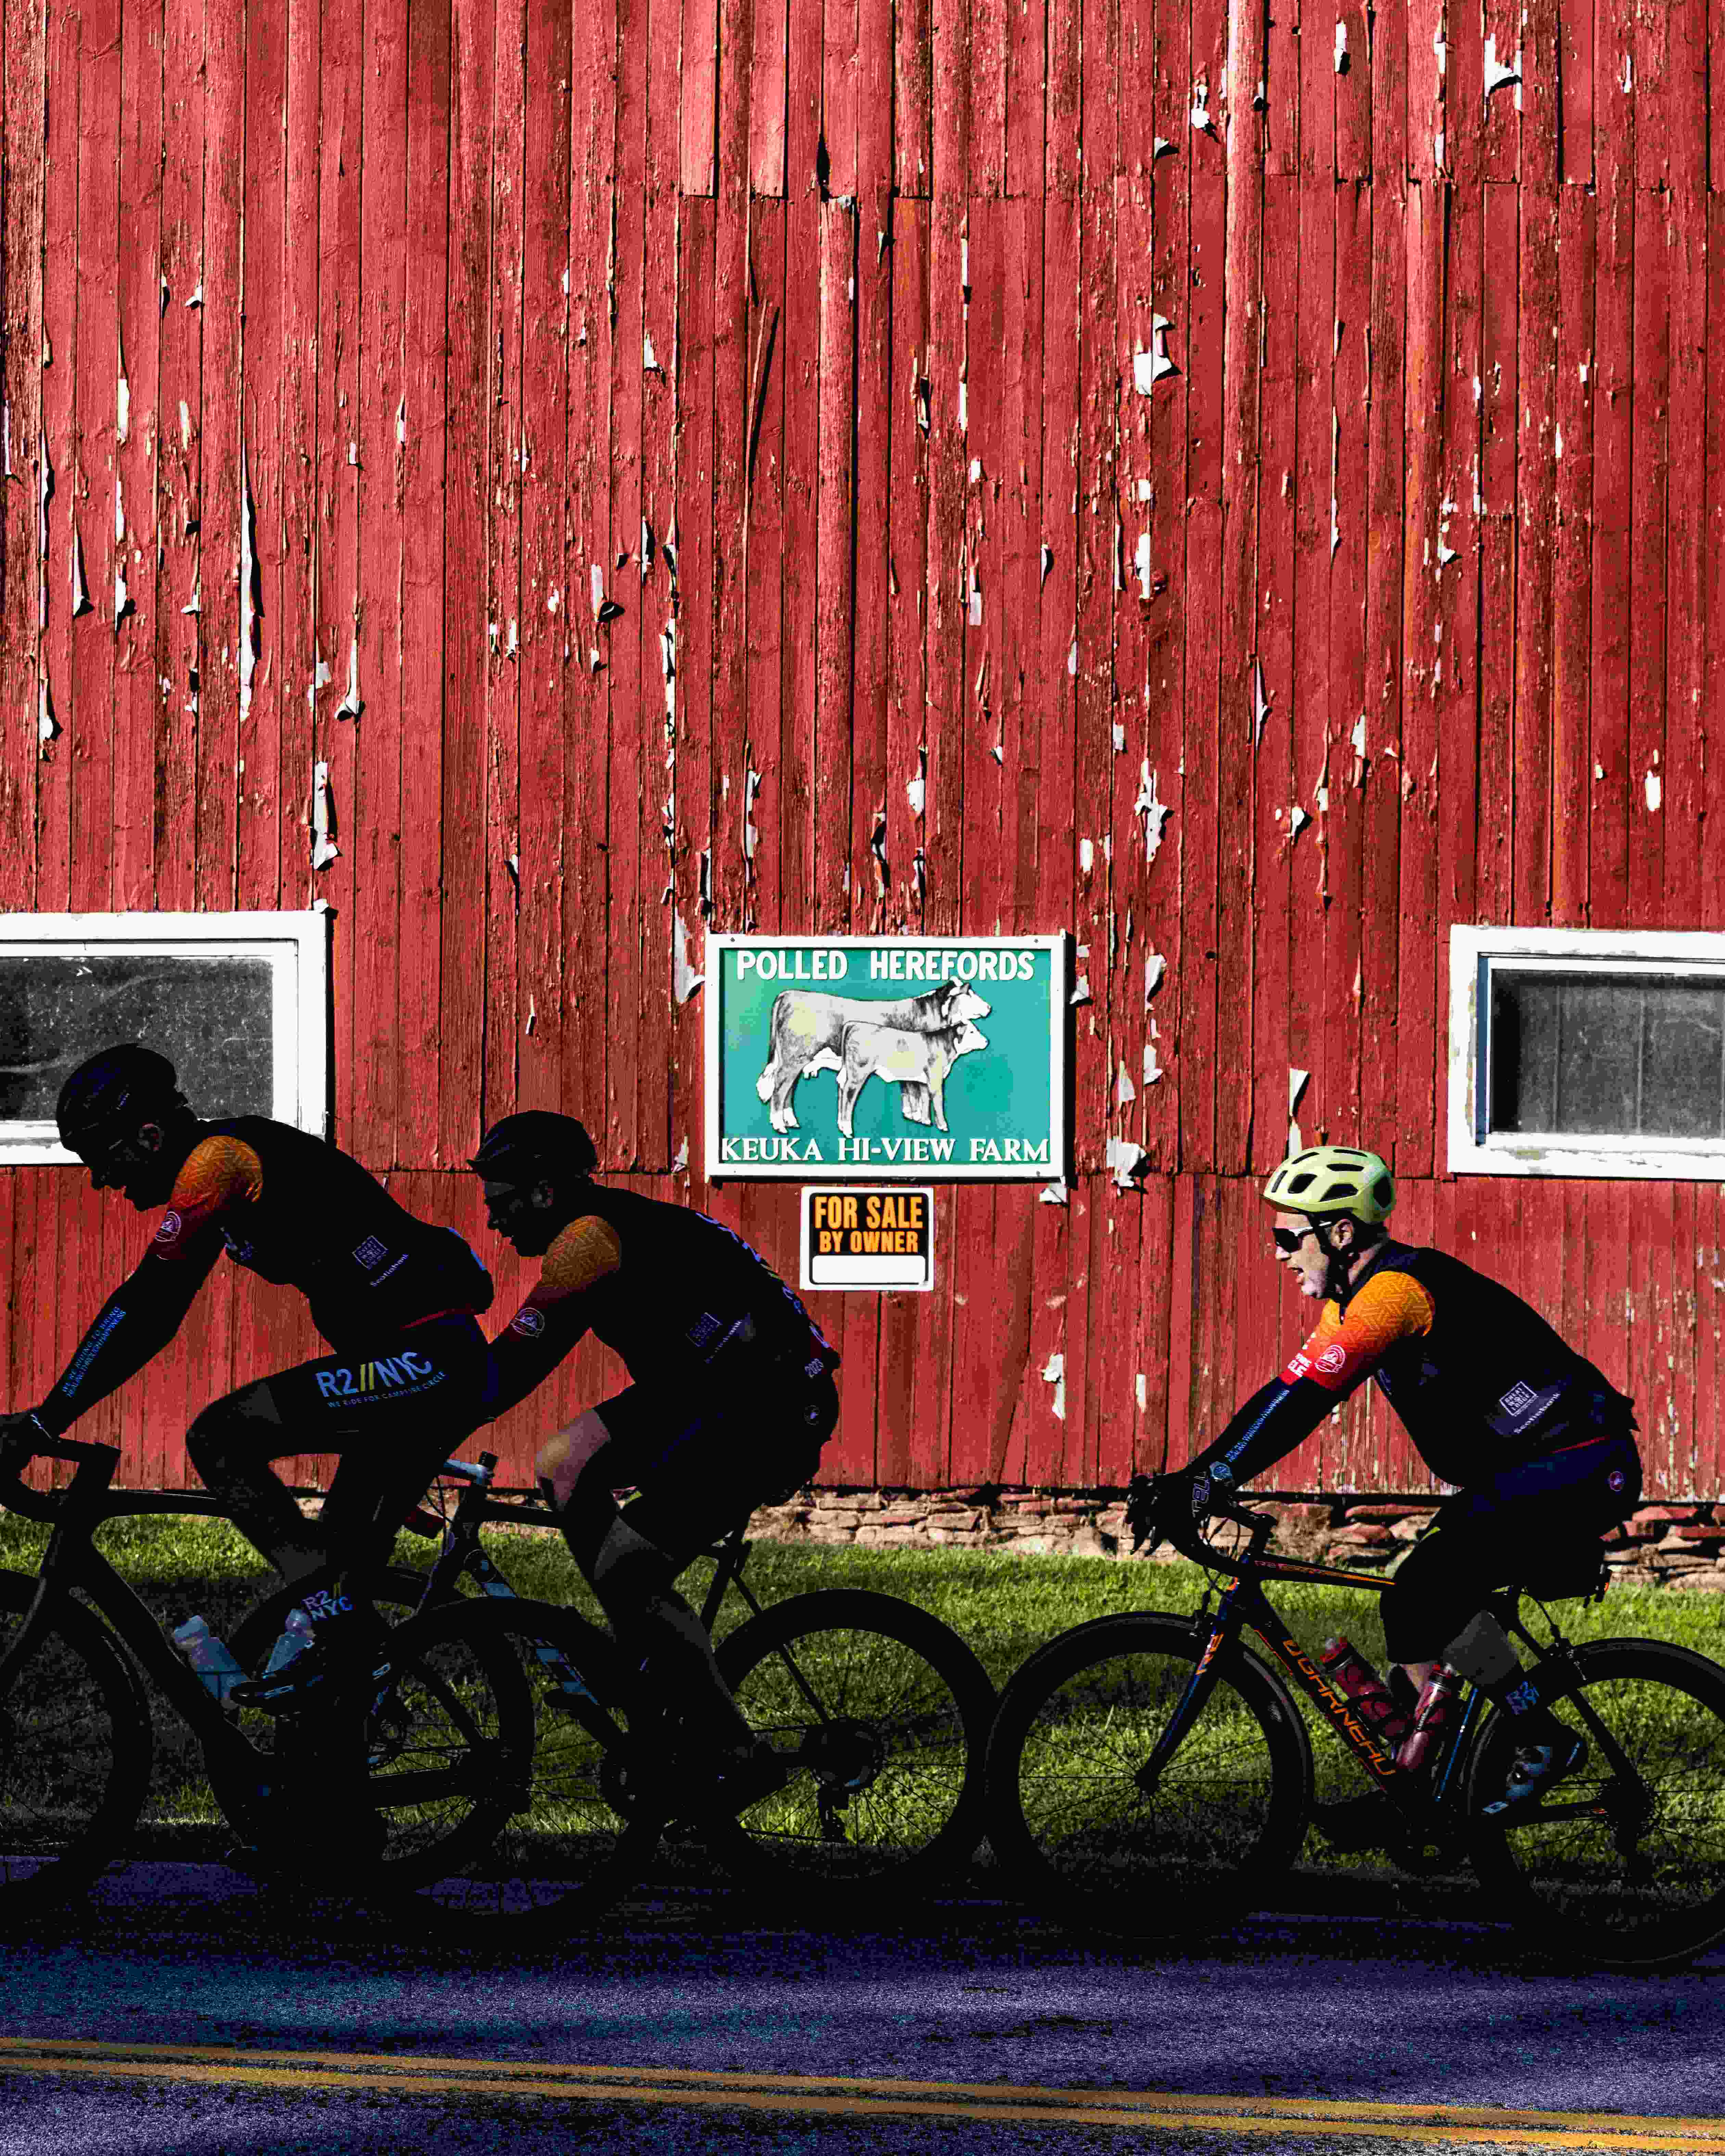 cyclists on the road, riding next to a worn down red barn